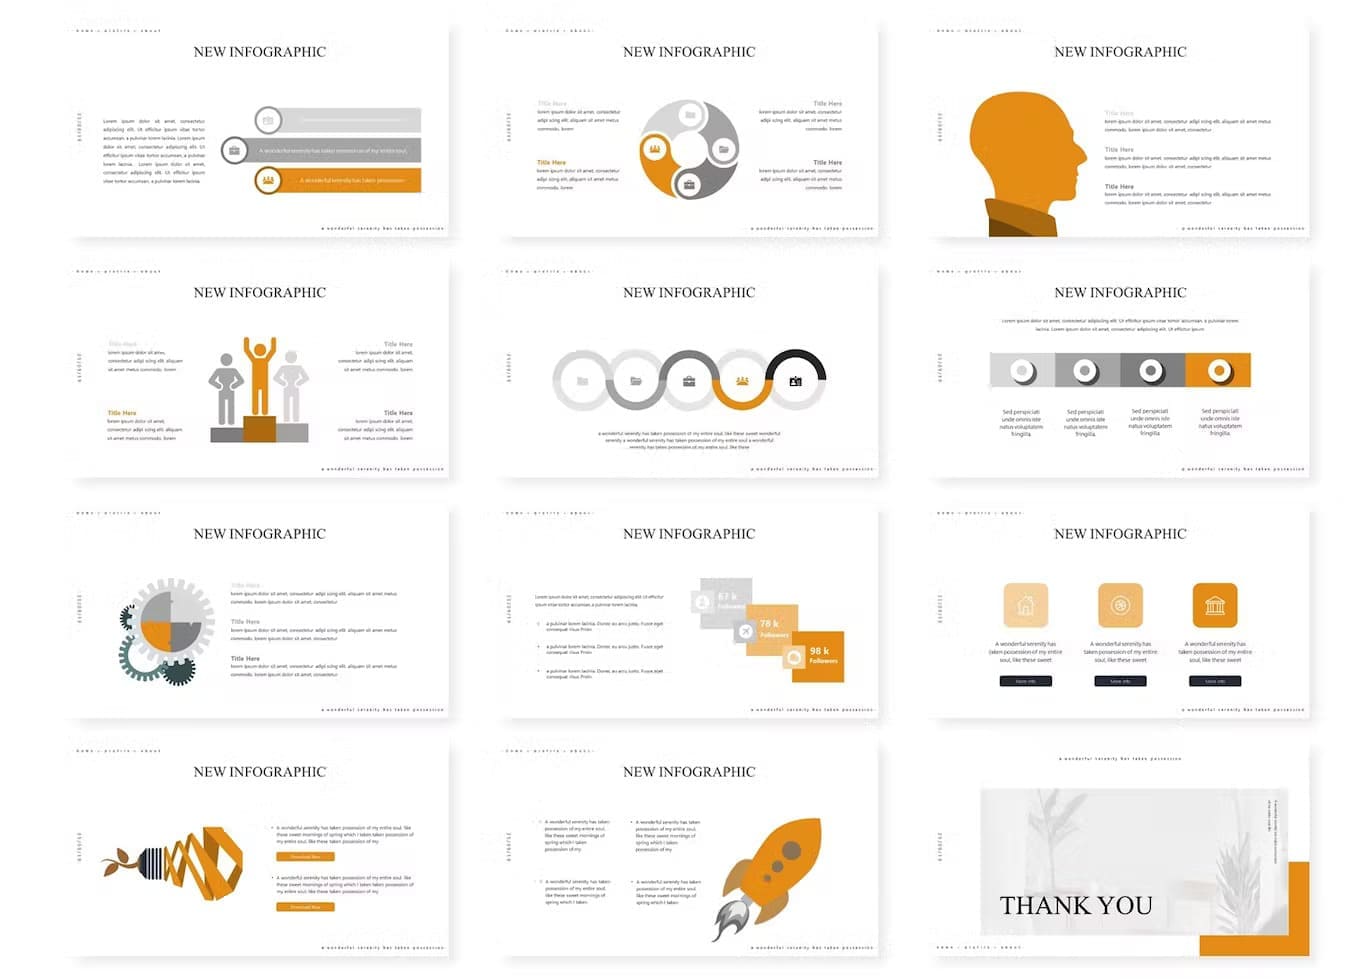 New Infographic of Cleastyle Powerpoint template.